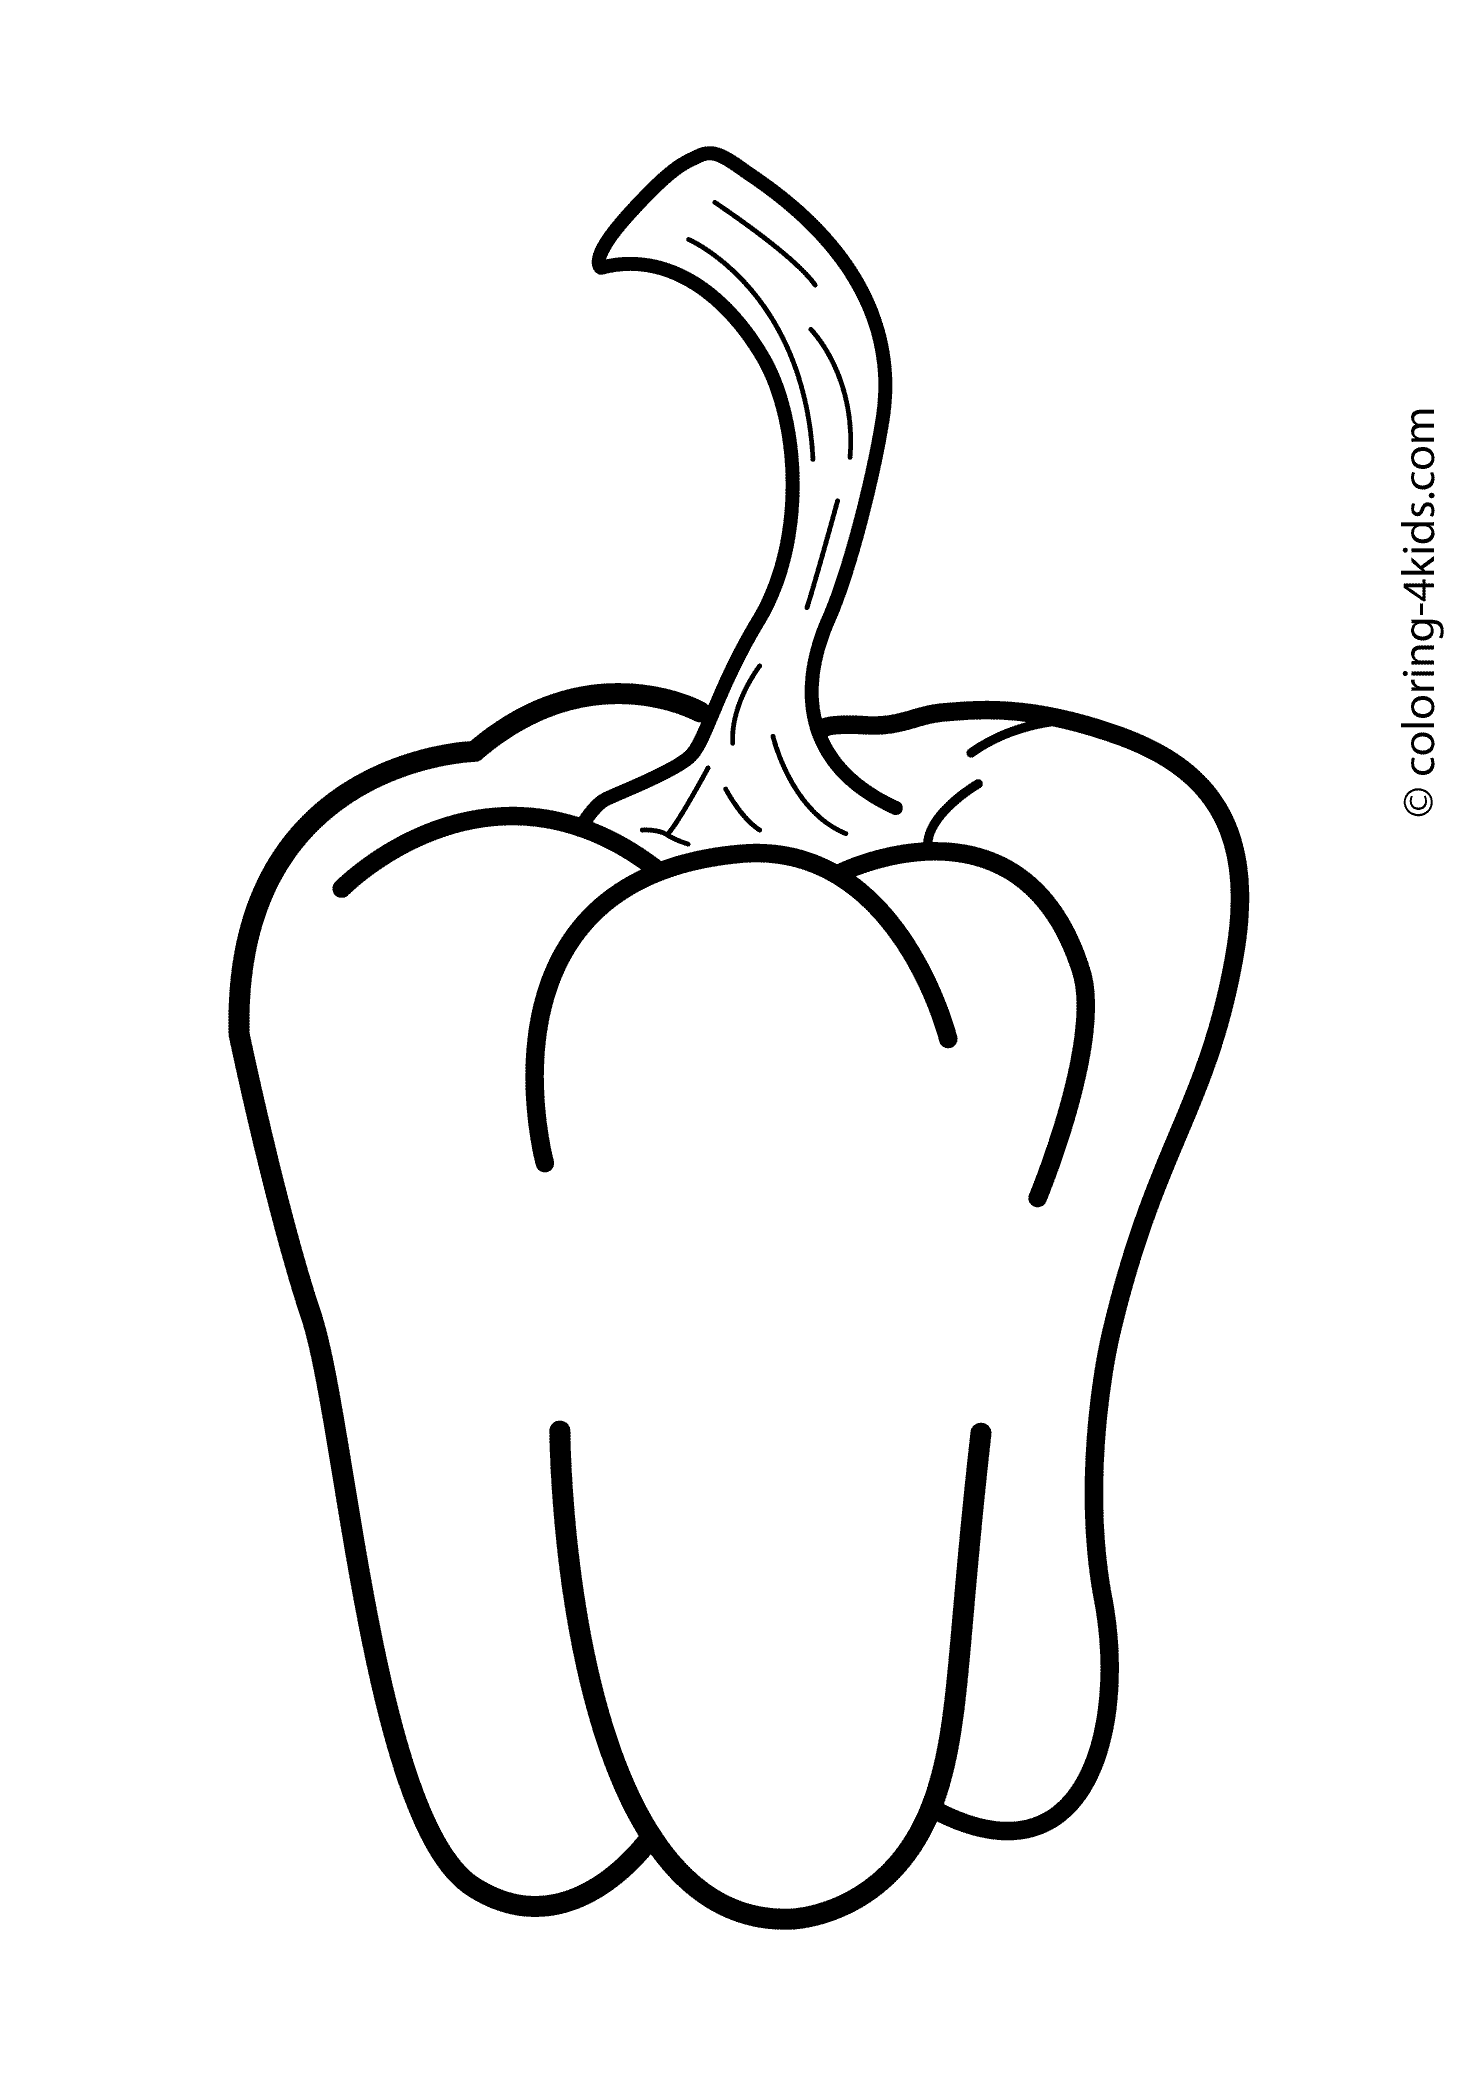 Pepper vegetable coloring page for kids, printable | Vegetable coloring  pages